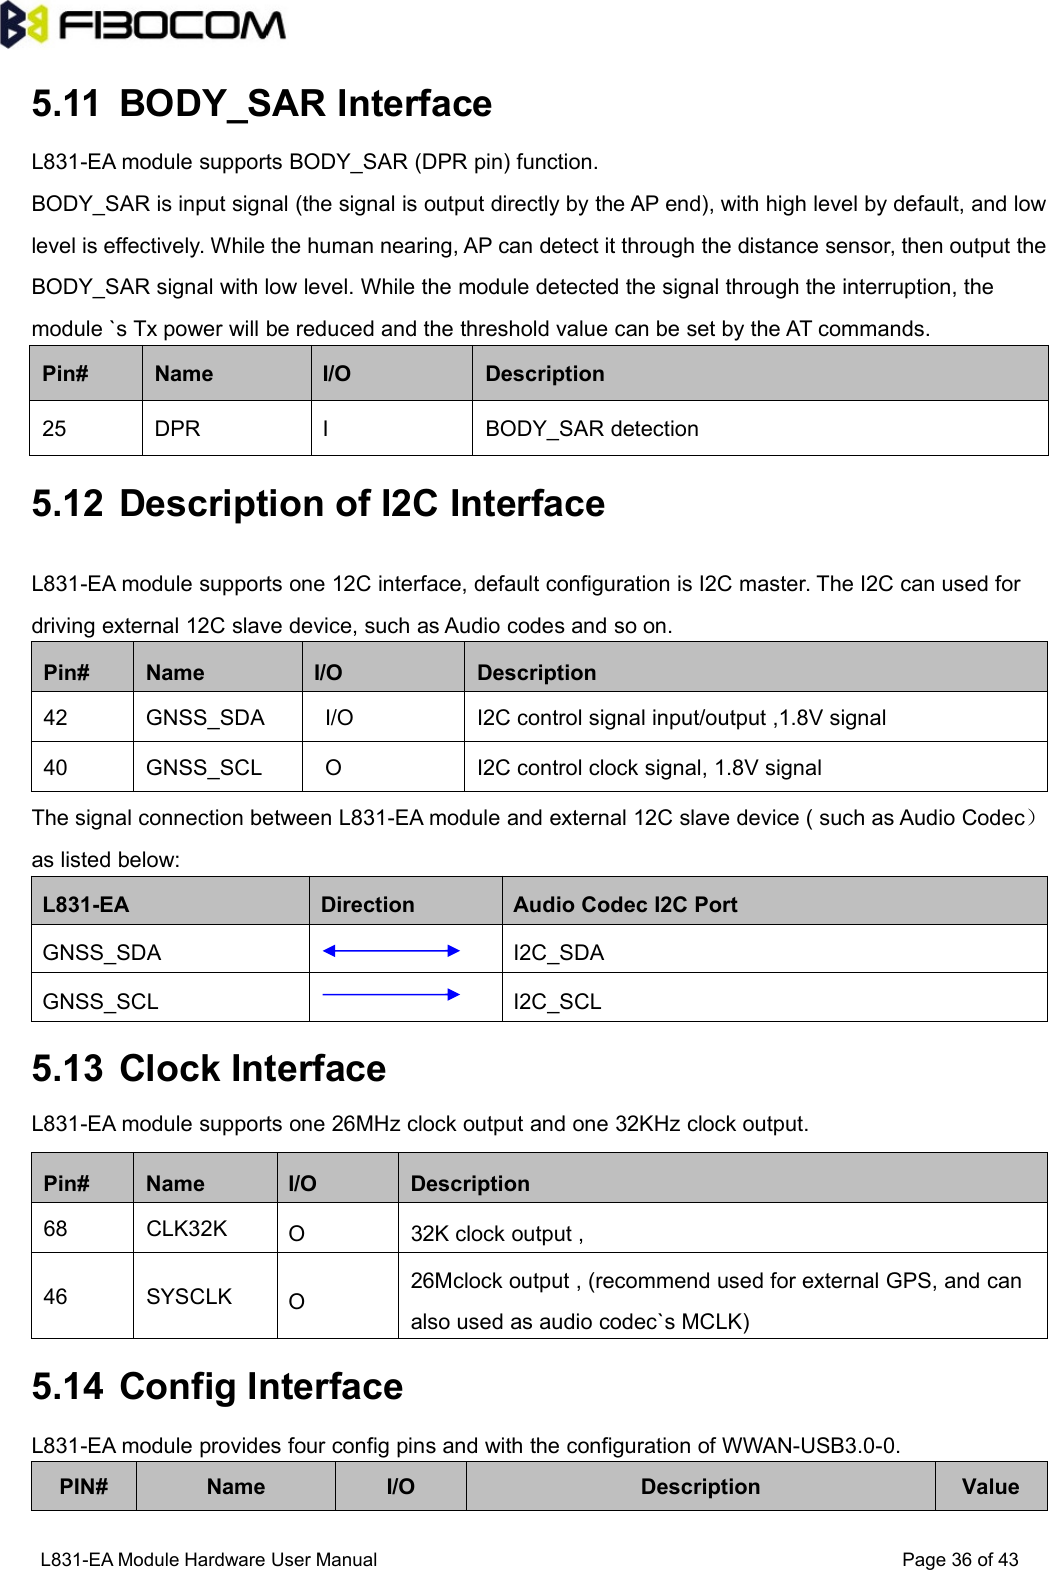 L831-EA Module Hardware User Manual Page36of435.11 BODY_SAR InterfaceL831-EA module supports BODY_SAR (DPR pin) function.BODY_SAR is input signal (the signal is output directly by the AP end), with high level by default, and lowlevel is effectively. While the human nearing, AP can detect it through the distance sensor, then output theBODY_SAR signal with low level. While the module detected the signal through the interruption, themodule `s Tx power will be reduced and the threshold value can be set by the AT commands.Pin#NameI/ODescription25DPRIBODY_SAR detection5.12 Description of I2C InterfaceL831-EA module supports one 12C interface, default configuration is I2C master. The I2C can used fordriving external 12C slave device, such as Audio codes and so on.Pin#NameI/ODescription42GNSS_SDAI/OI2C control signal input/output ,1.8V signal40GNSS_SCLOI2C control clock signal, 1.8V signalThe signal connection between L831-EA module and external 12C slave device ( such as Audio Codec）as listed below:L831-EADirectionAudio Codec I2C PortGNSS_SDAI2C_SDAGNSS_SCLI2C_SCL5.13 Clock InterfaceL831-EA module supports one 26MHz clock output and one 32KHz clock output.Pin#NameI/ODescription68CLK32KO32K clock output ,46SYSCLKO26Mclock output , (recommend used for external GPS, and canalso used as audio codec`s MCLK)5.14 Config InterfaceL831-EA module provides four config pins and with the configuration of WWAN-USB3.0-0.PIN#NameI/ODescriptionValue